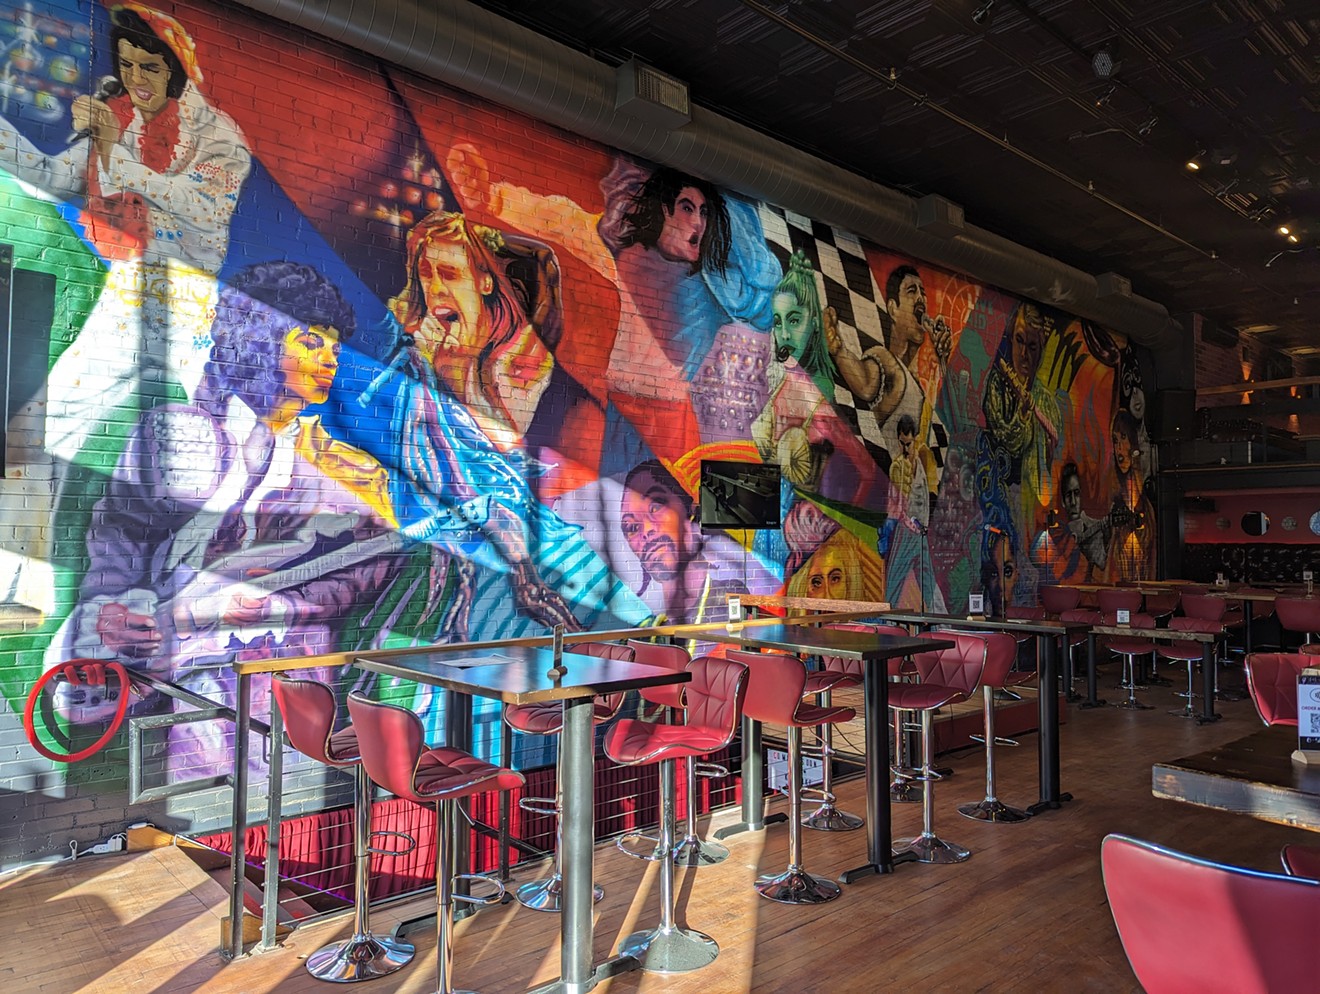 Freddy Mercury takes center stage in the new mural at Rhapsody, a nod to the bar's name.